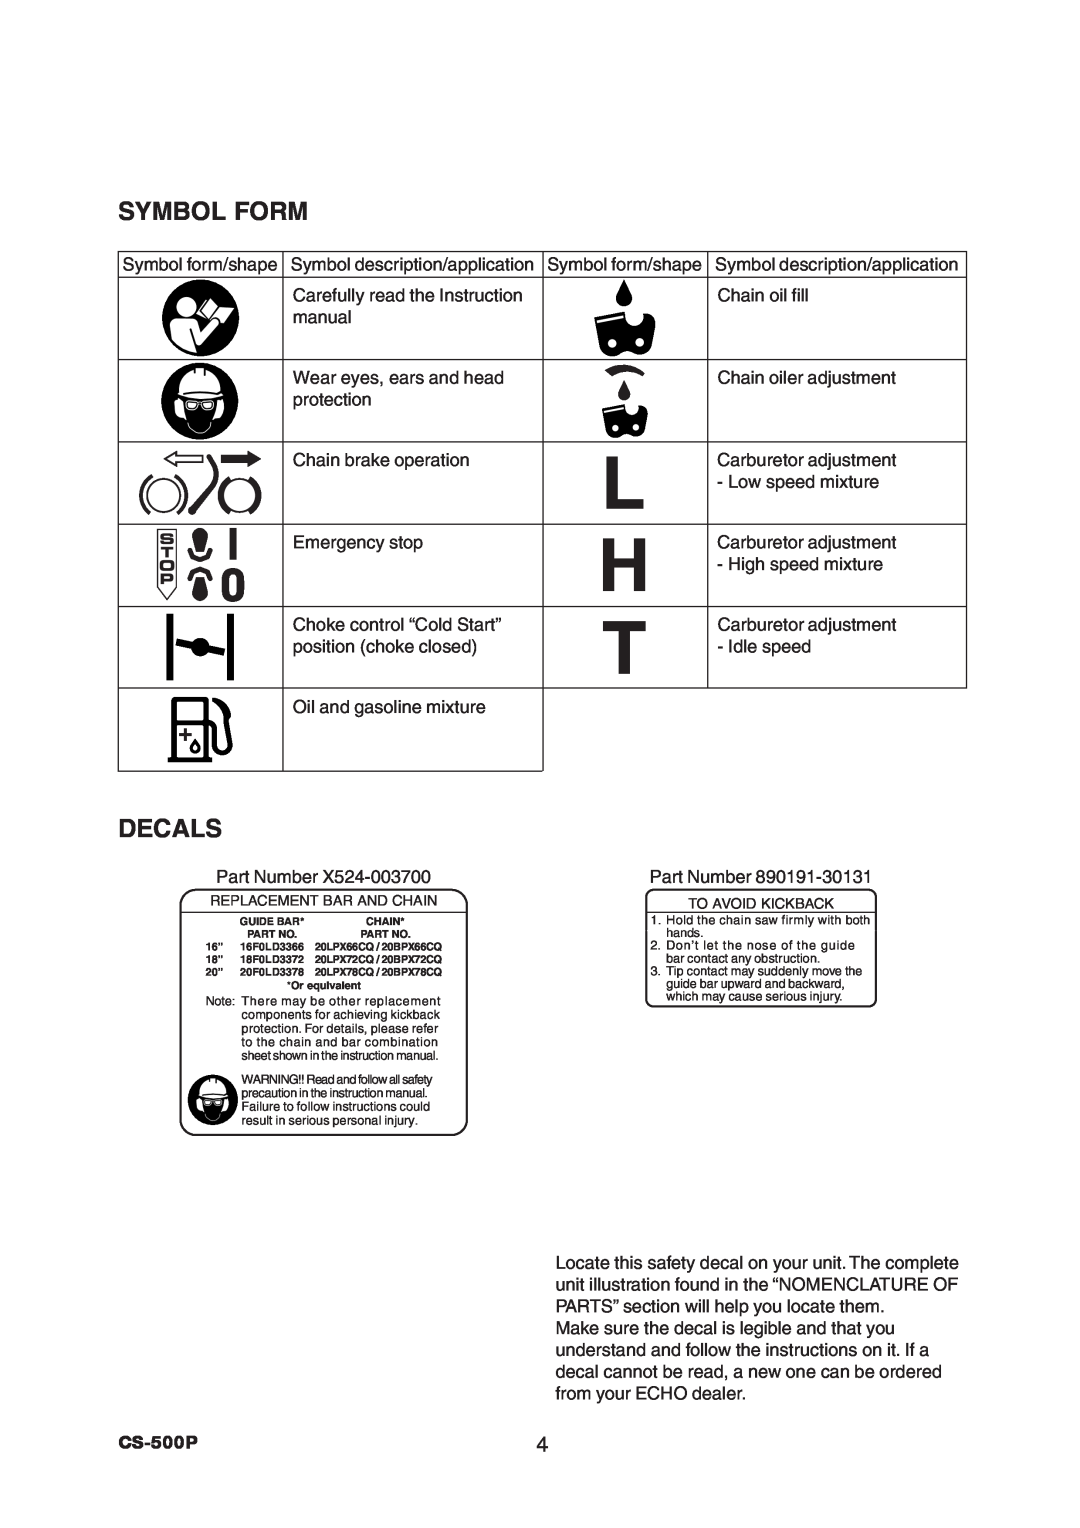 Echo CS-500P instruction manual Symbol Form, Decals, Replacement Bar And Chain, To Avoid Kickback 